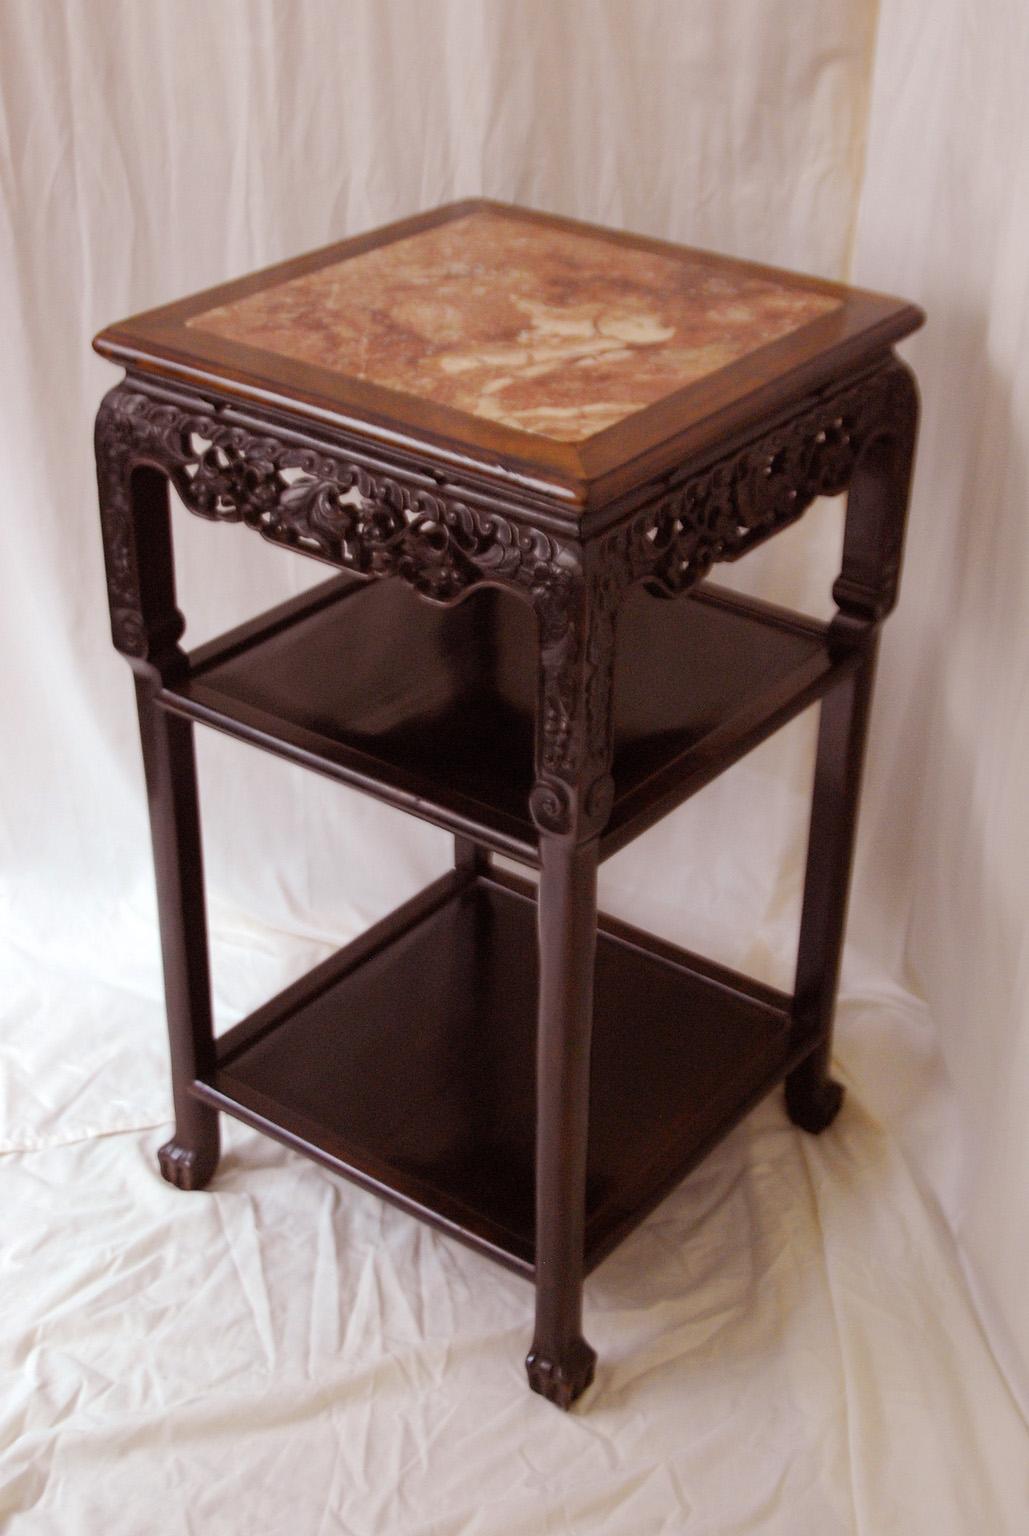 Chinese Qing dynasty carved rosewood display stand with two paneled shelves and rose marble square inlay to the top. The carving is subtle and elegant. This 31 3/4